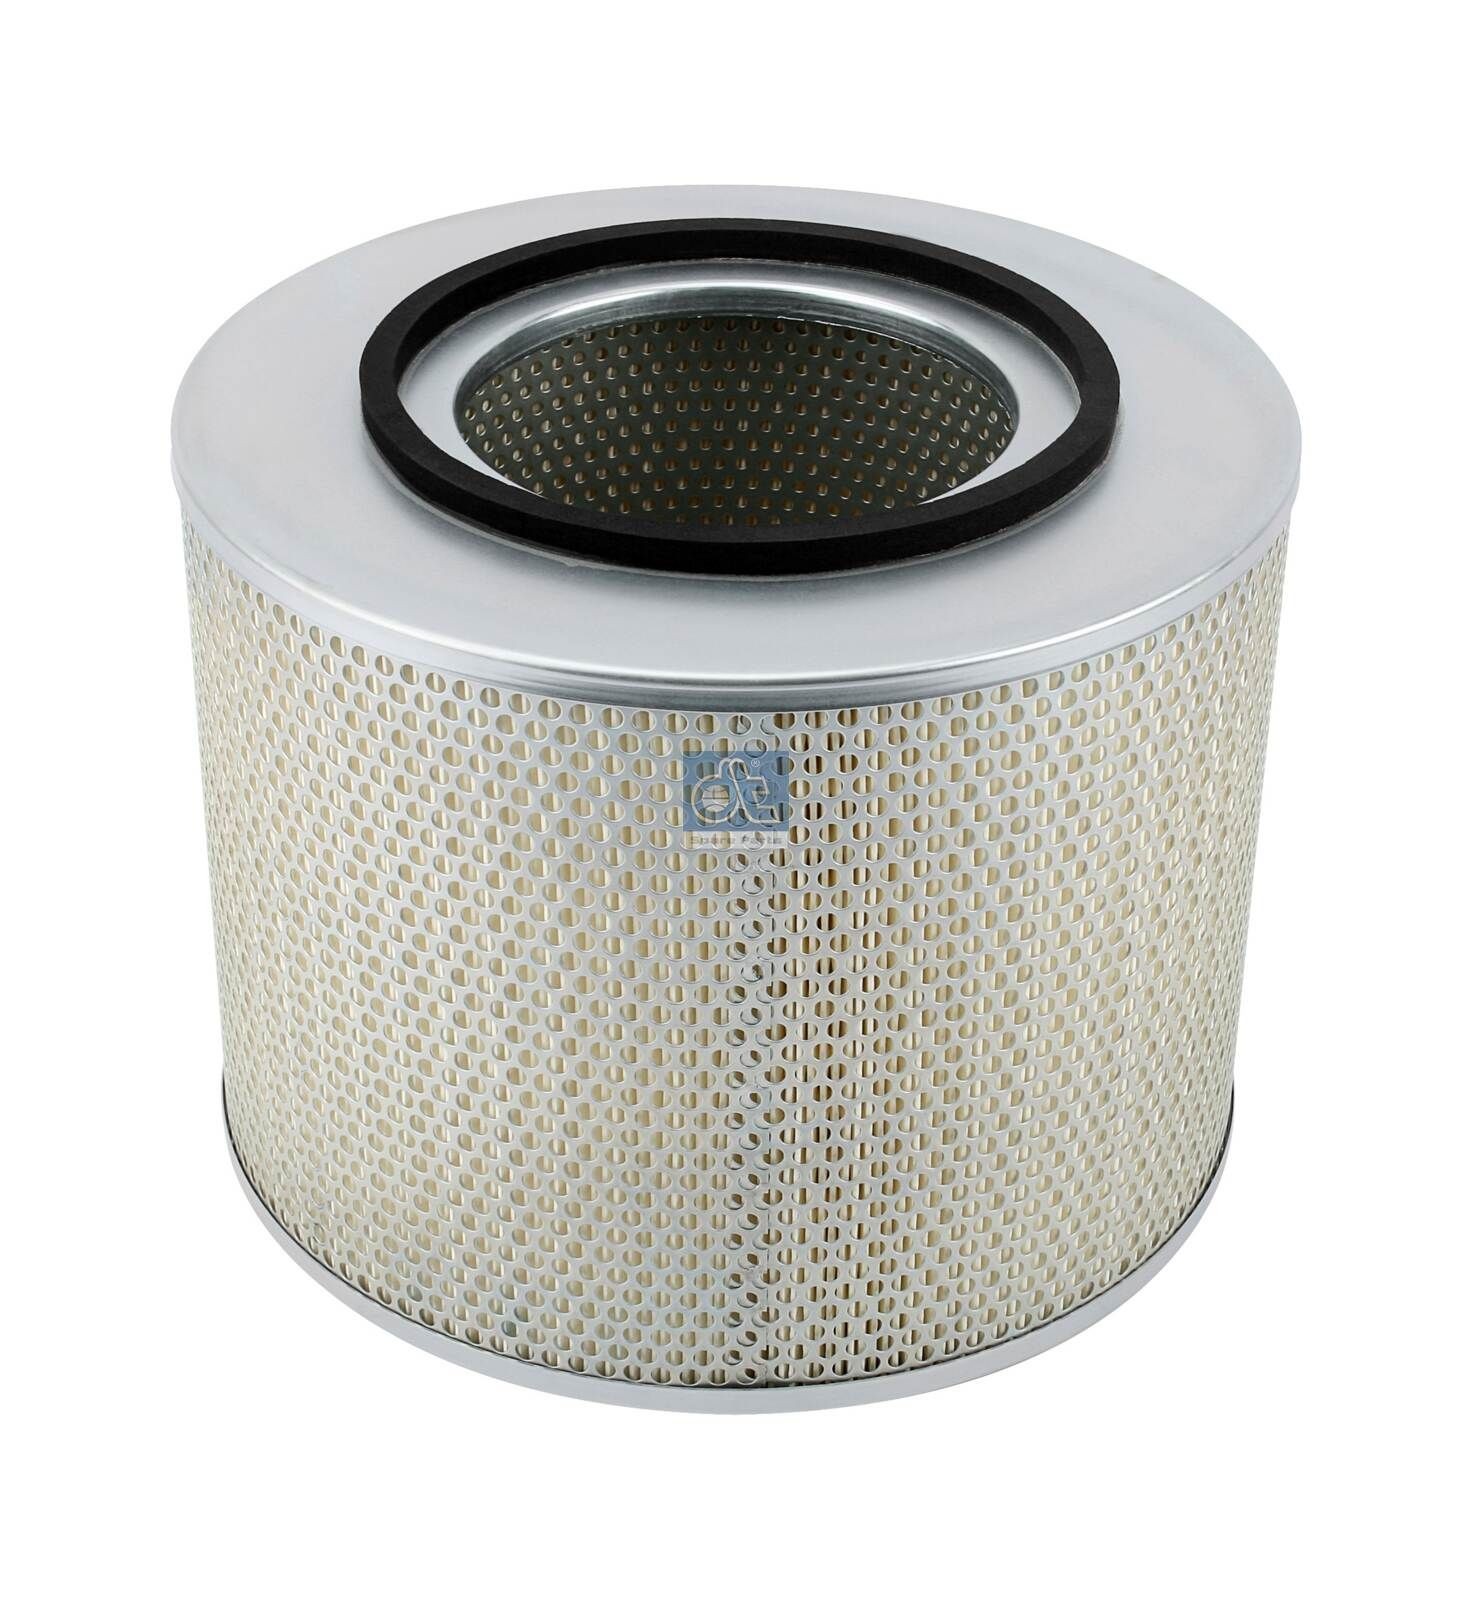 C 33 1015 DT Spare Parts 261mm, 326mm, Filter Insert Height: 261mm Engine air filter 4.61534 buy